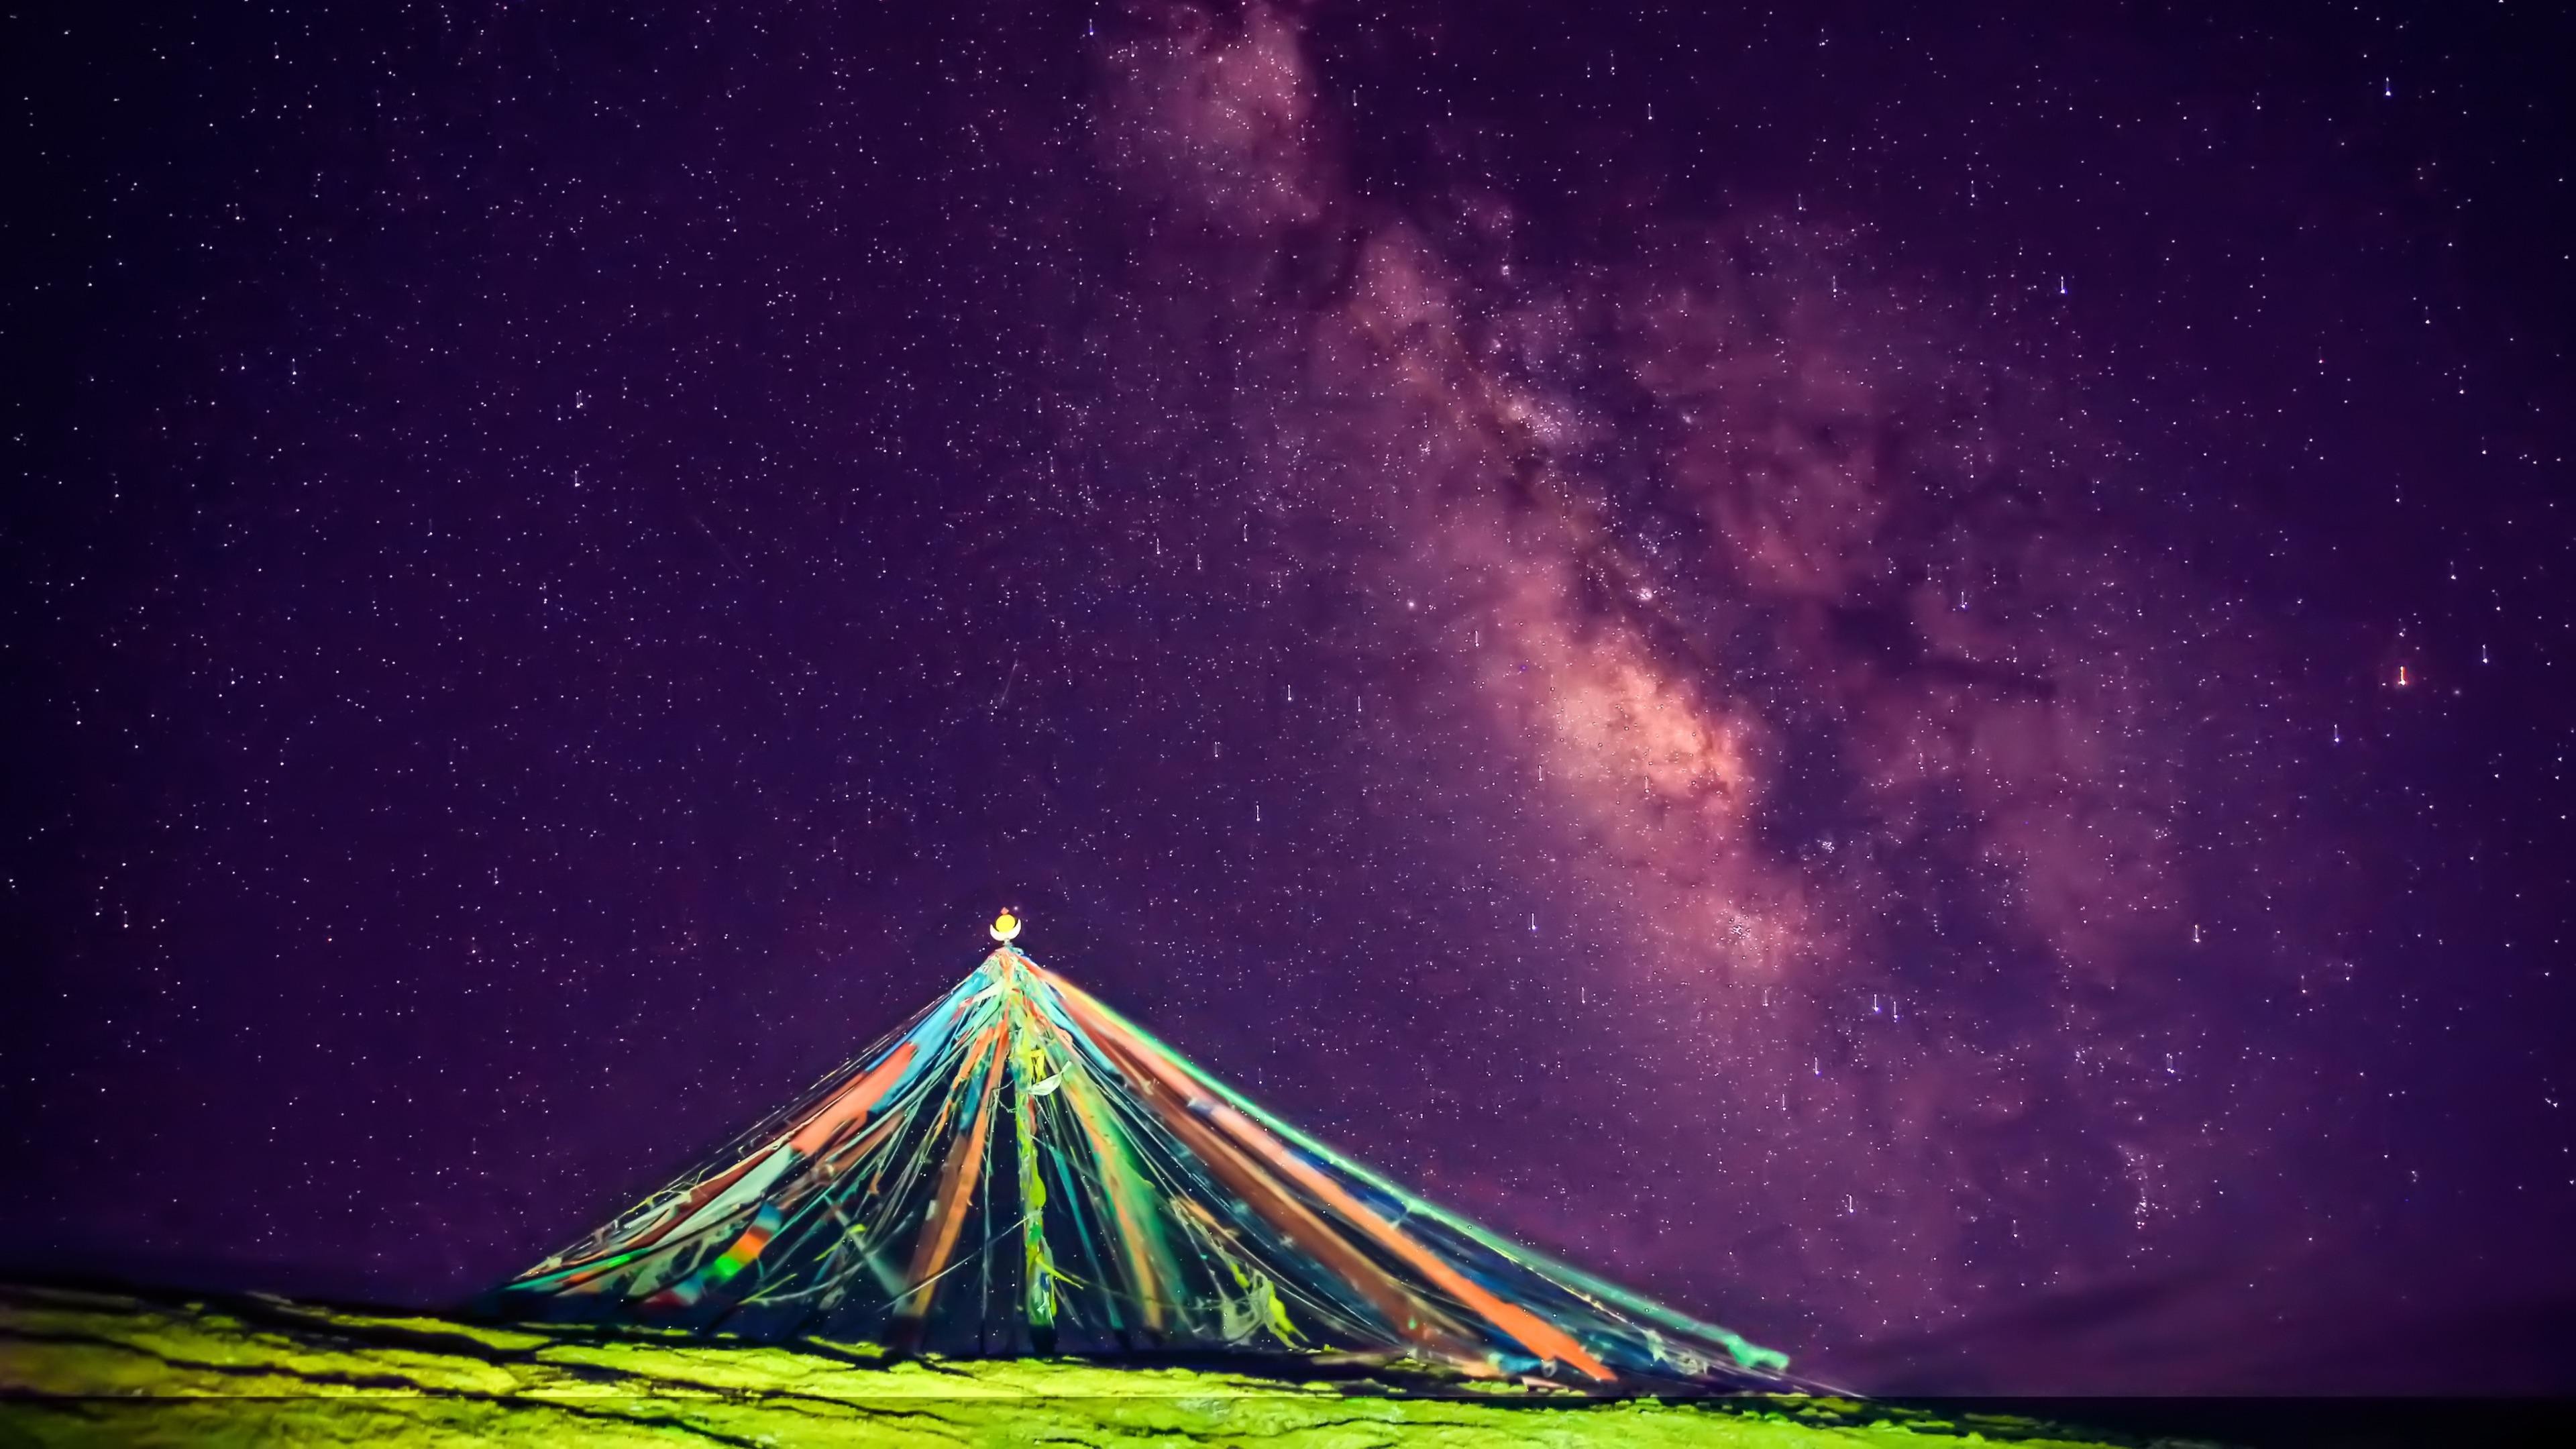 3840x2160, Prayer Flags Pile With The Milky Way Wallpaper - Milky Way Galaxy 4k - HD Wallpaper 